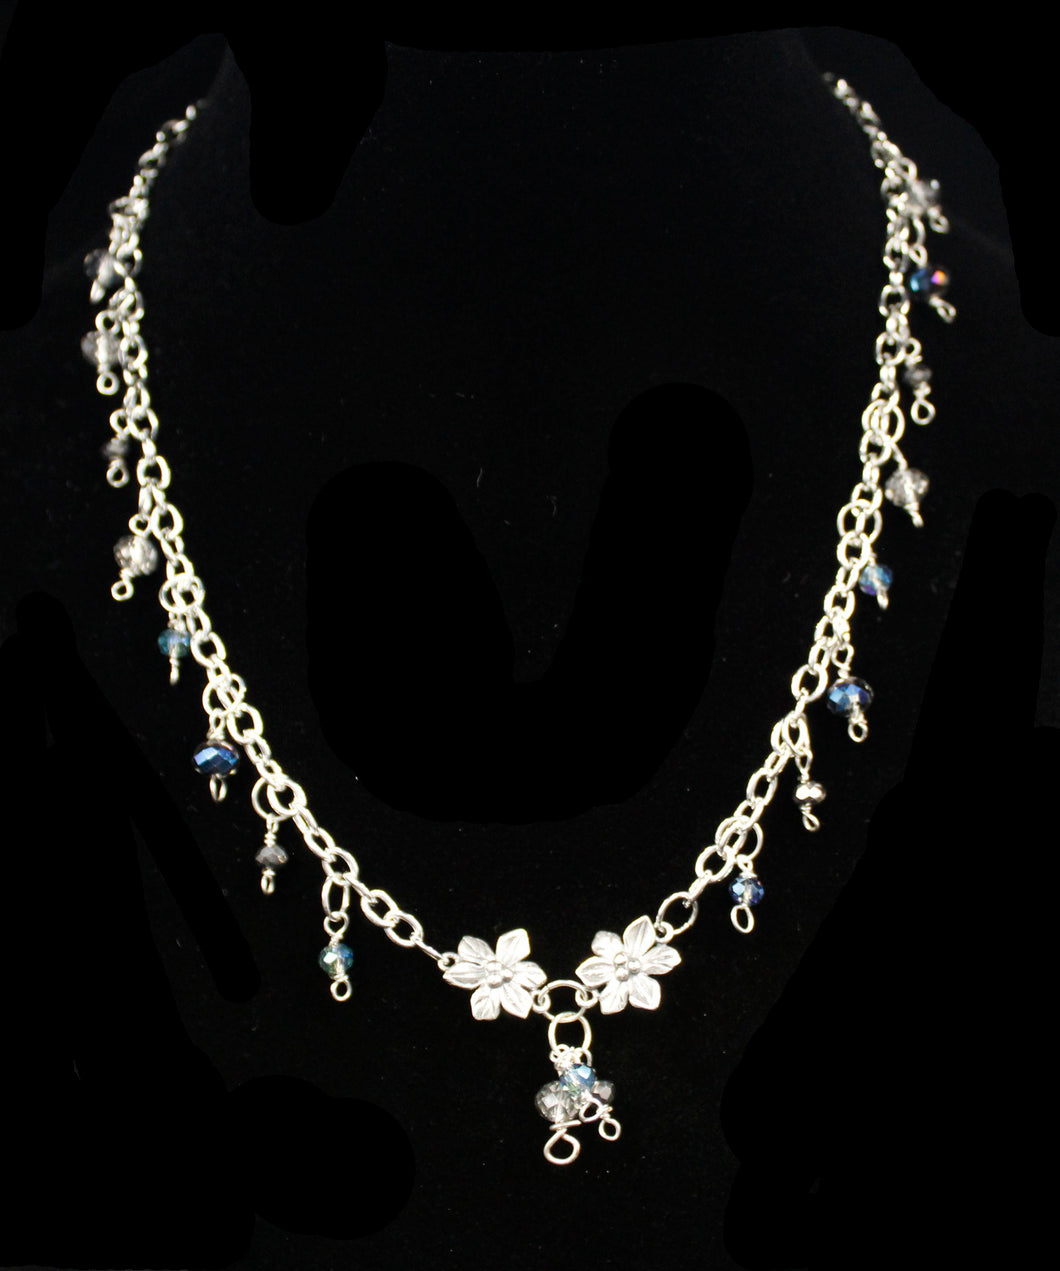 Sterling Silver Filled Necklace with Crystal Beads and Flowers